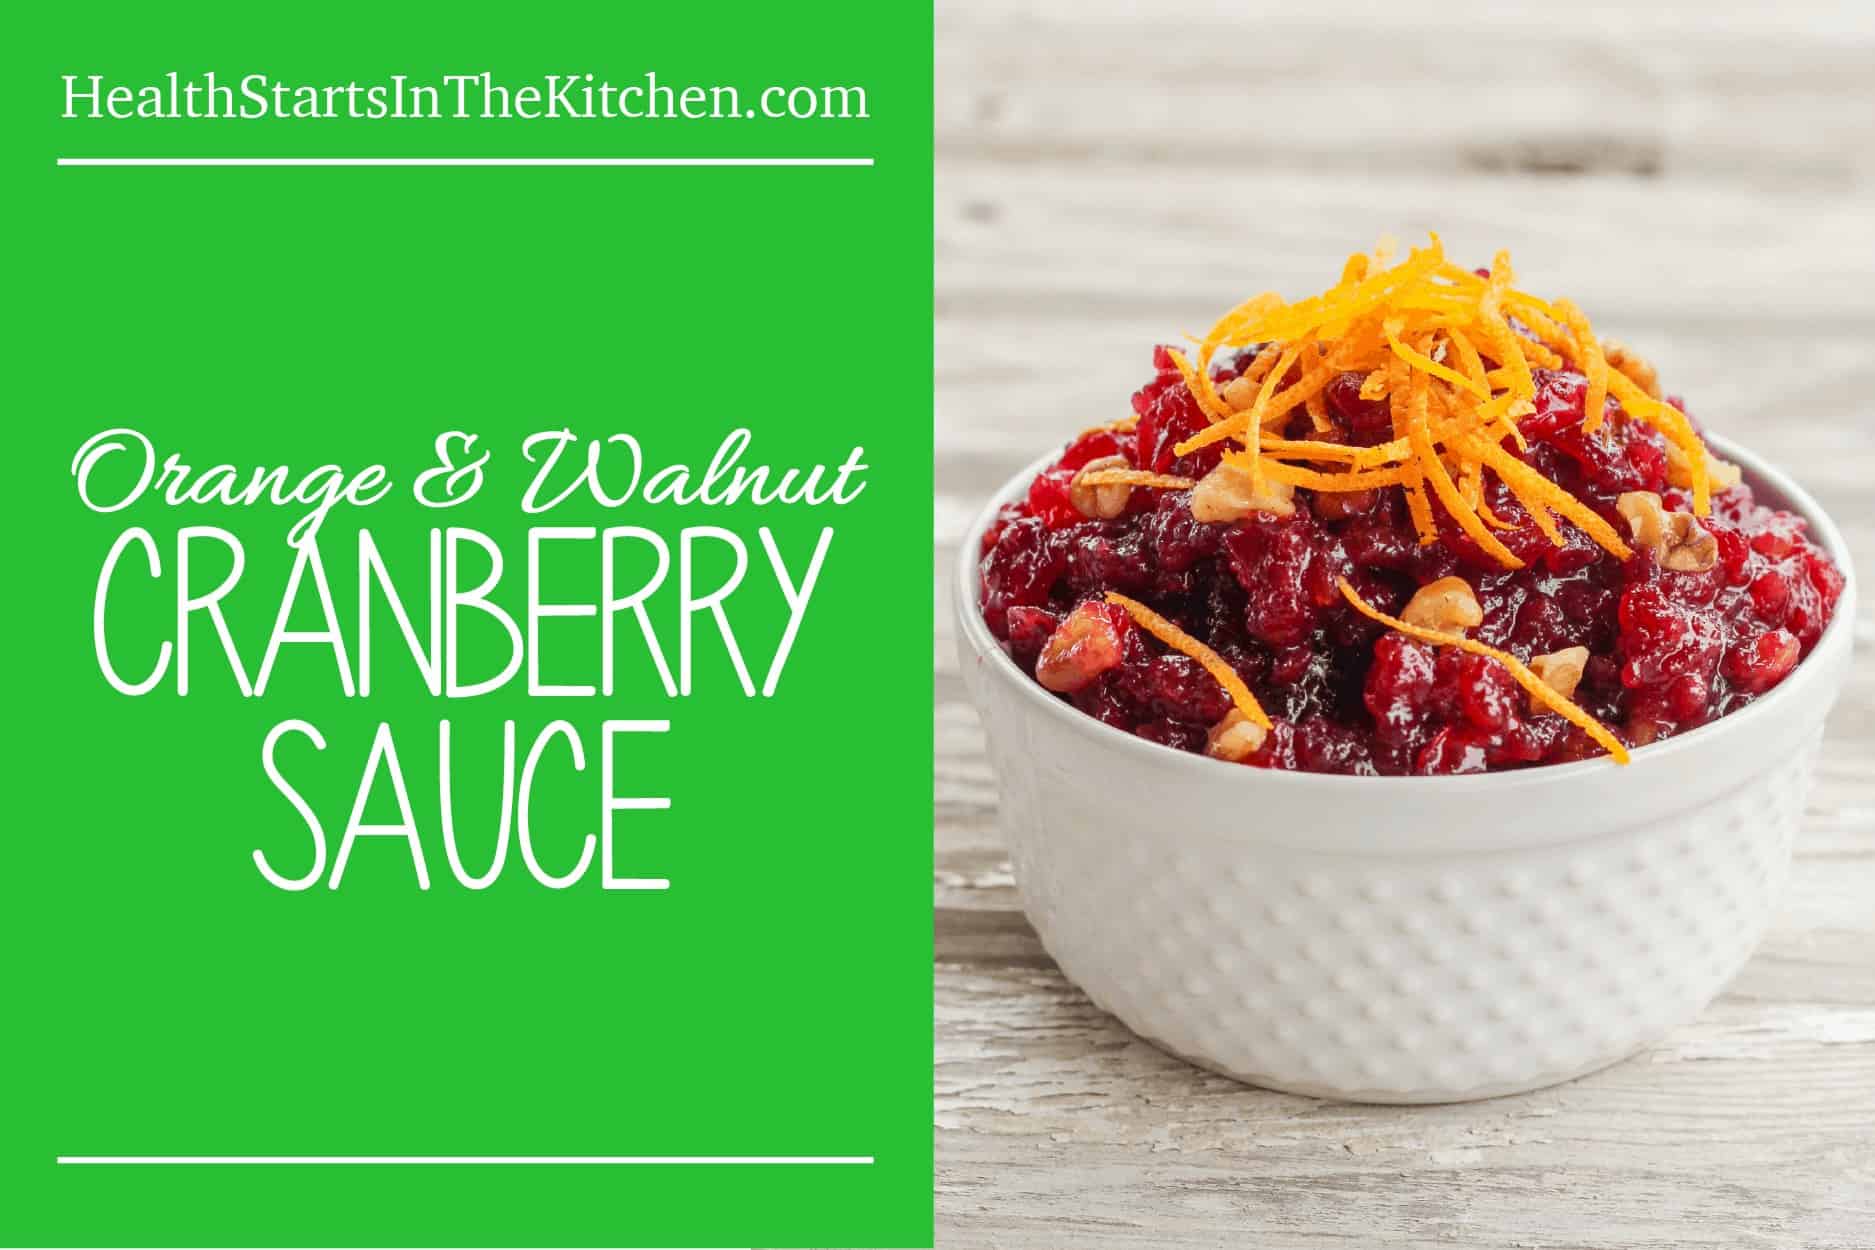 So easy and Delicious, Cranberry, Orange & Walnut Sauce. Perfect for pairing with your Thanksgiving Turkey